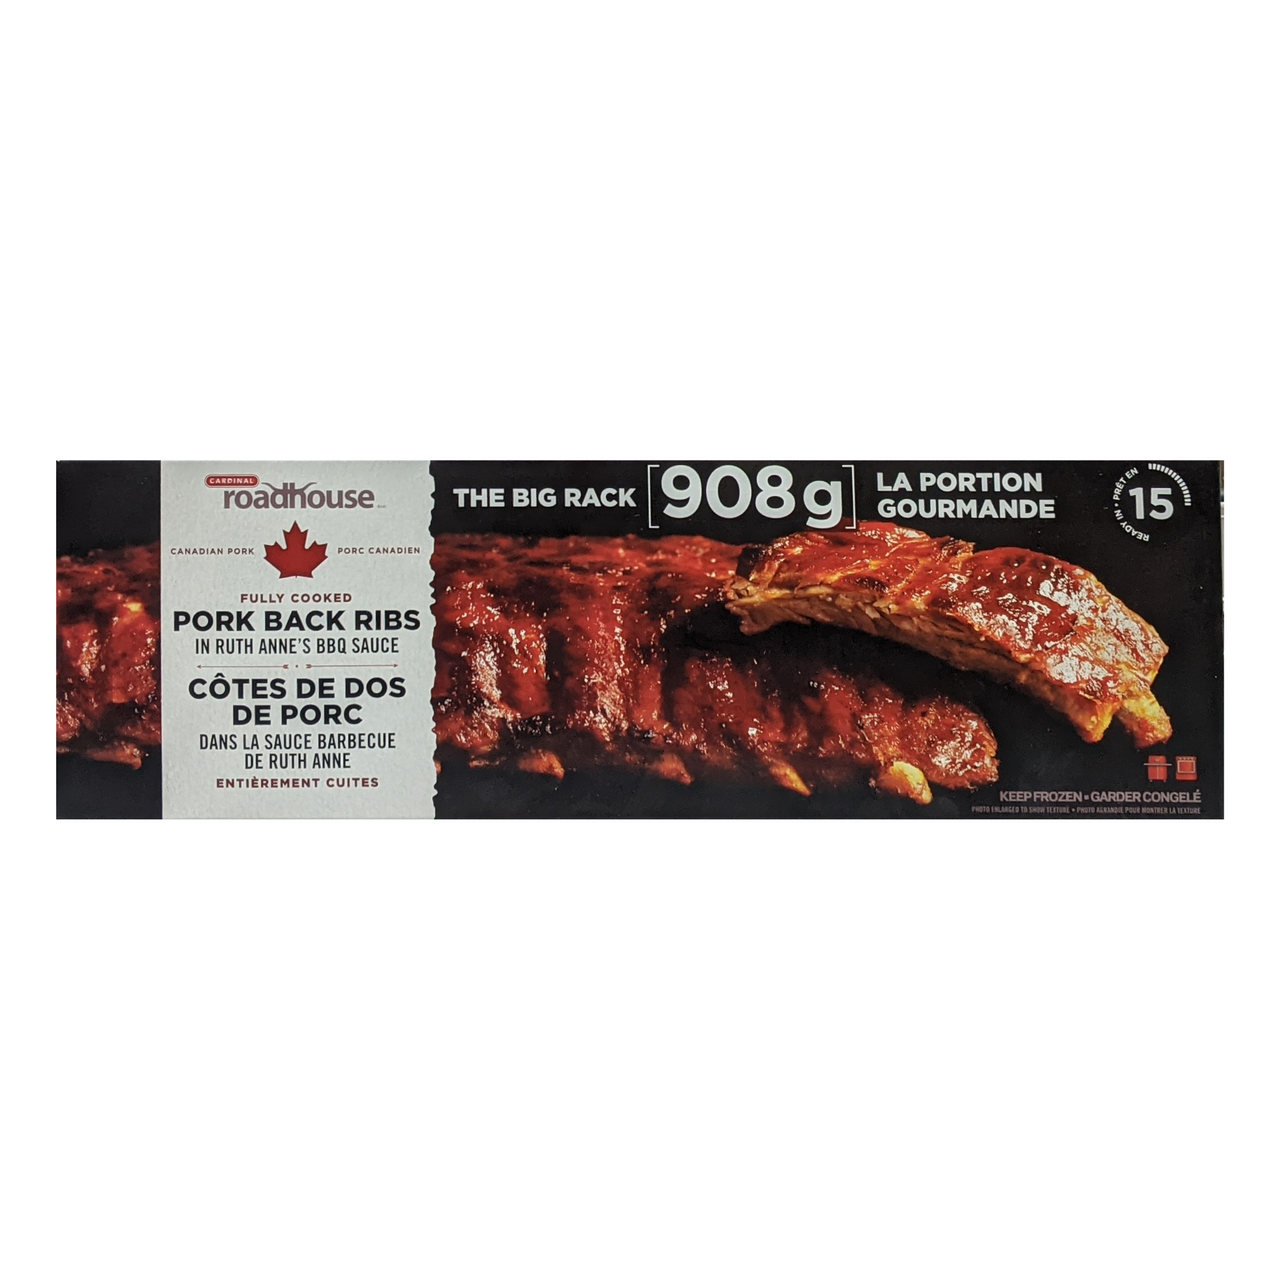 Image of Cardinal Roadhouse Fully Cooked Pork Back Ribs in Ruth Anne's BBQ Sauce 908g